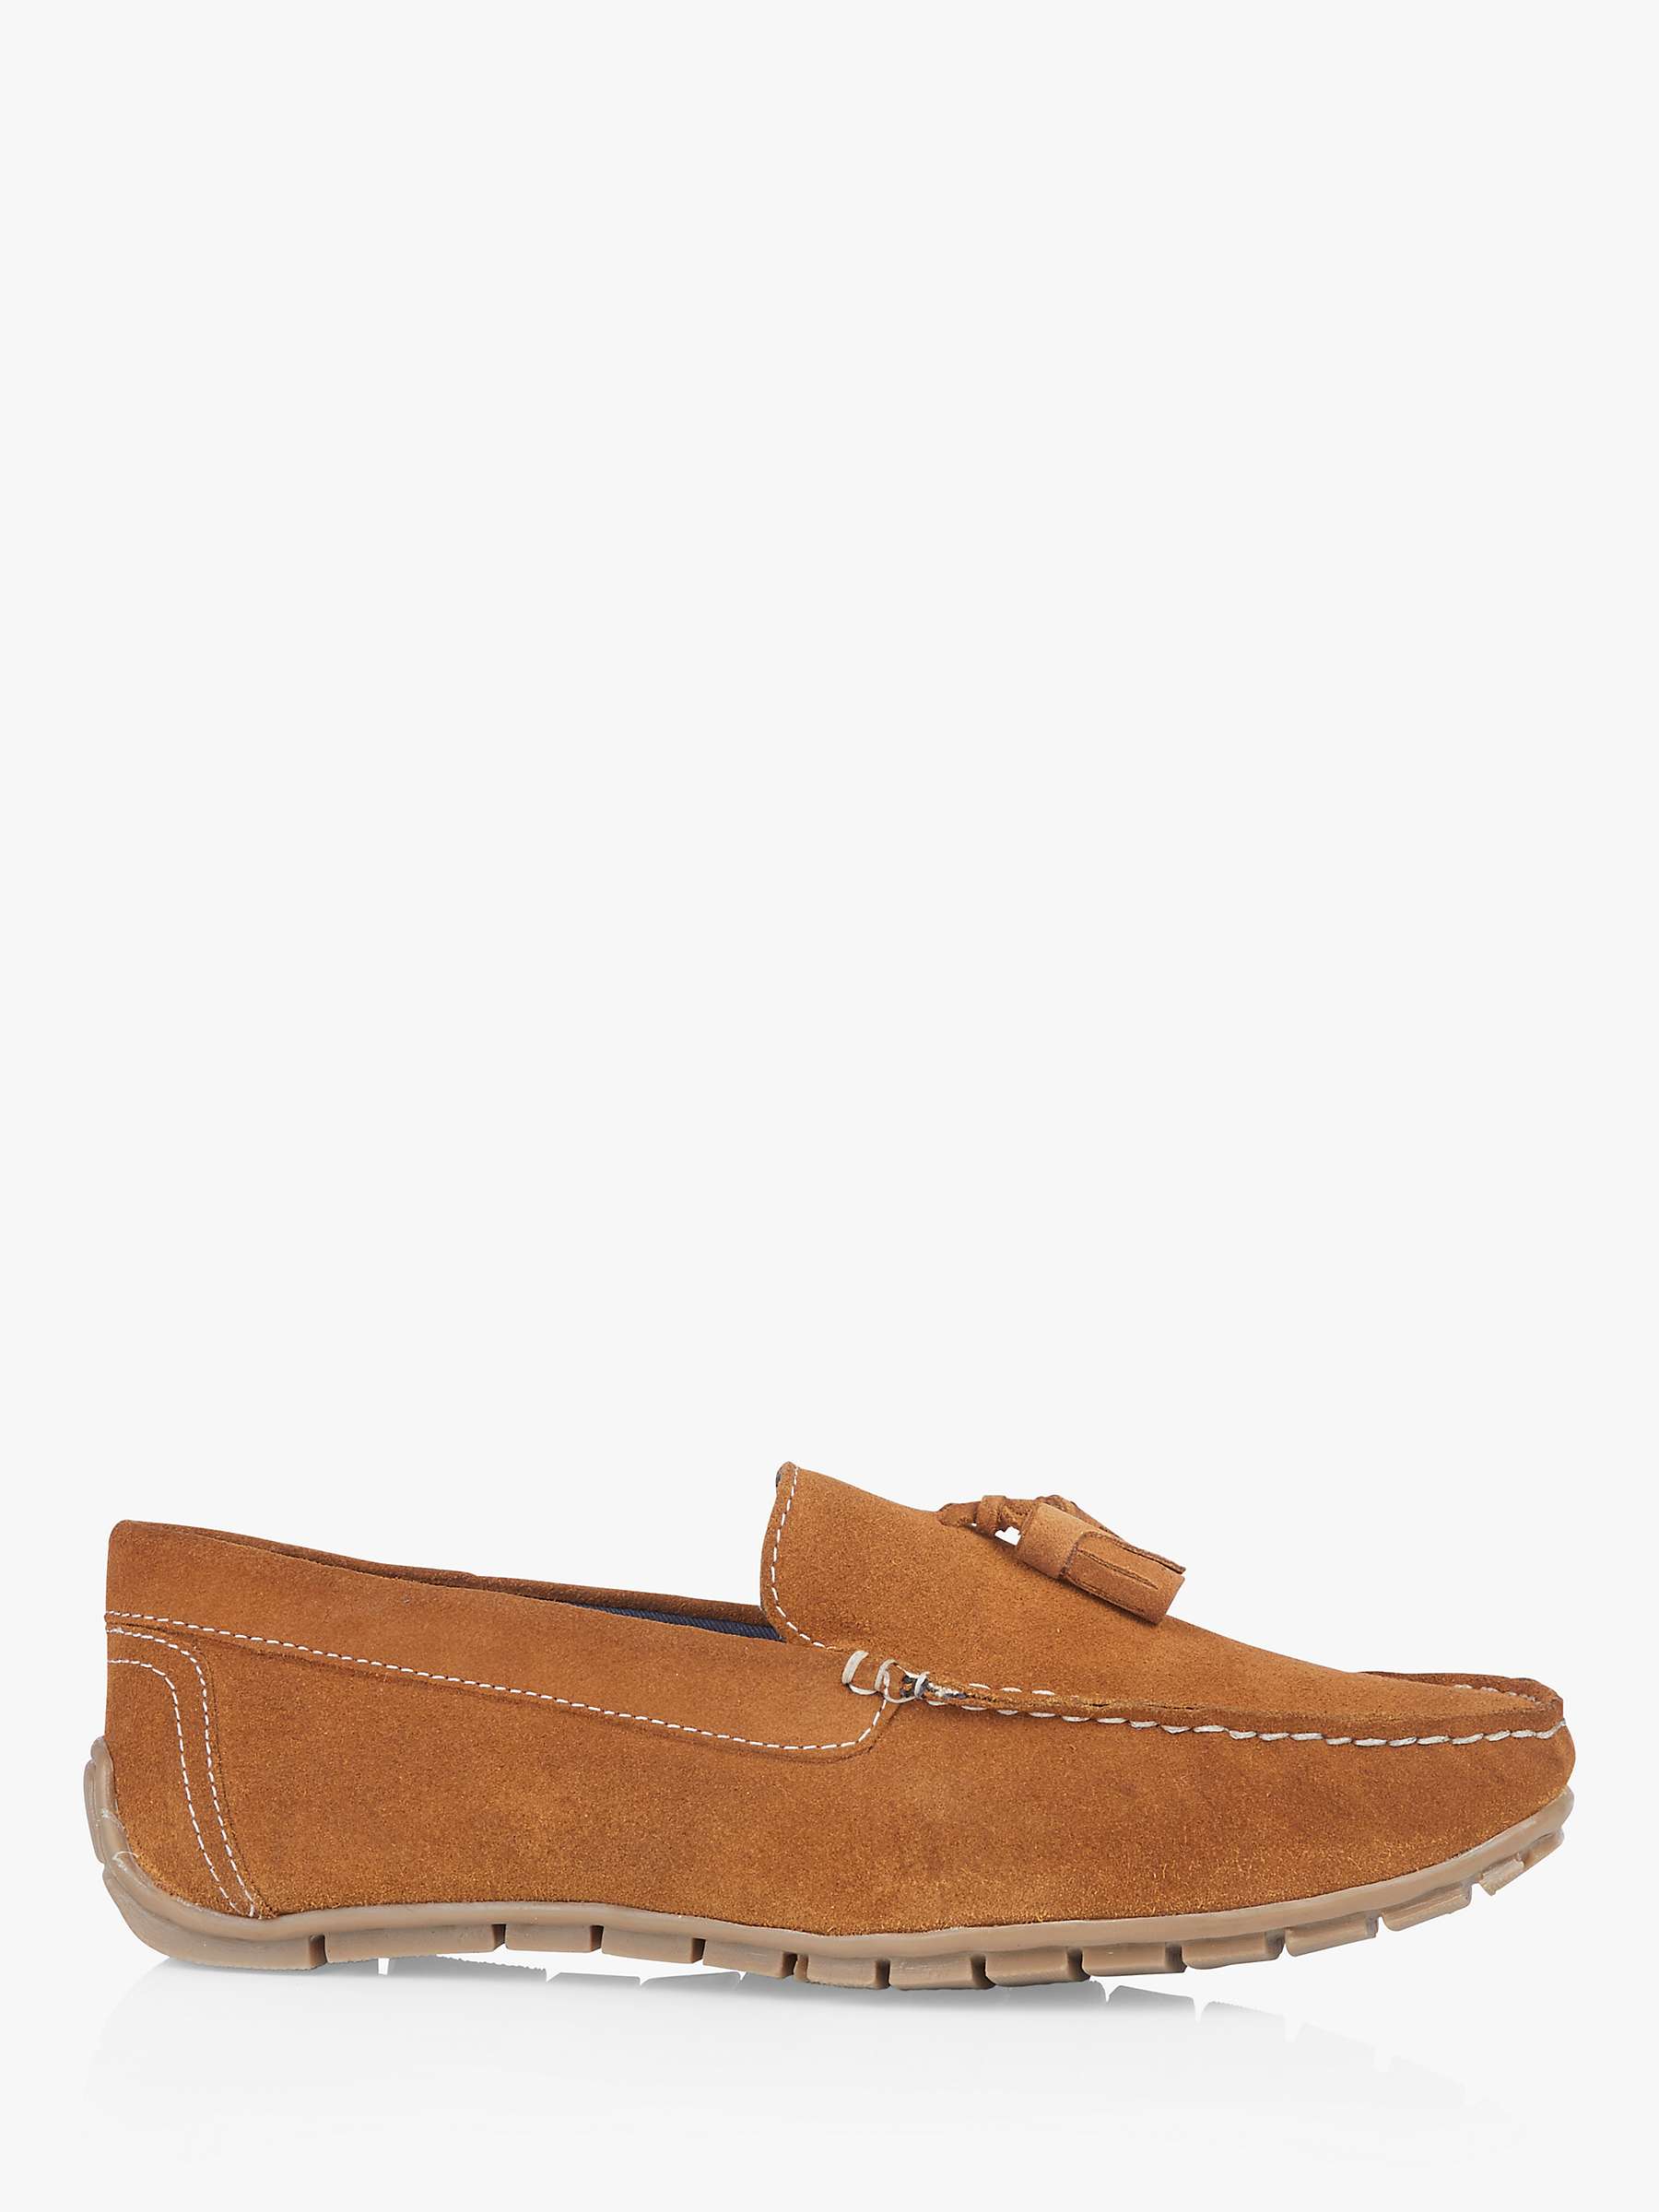 Buy Silver Street London Monza Suede Loafers Online at johnlewis.com